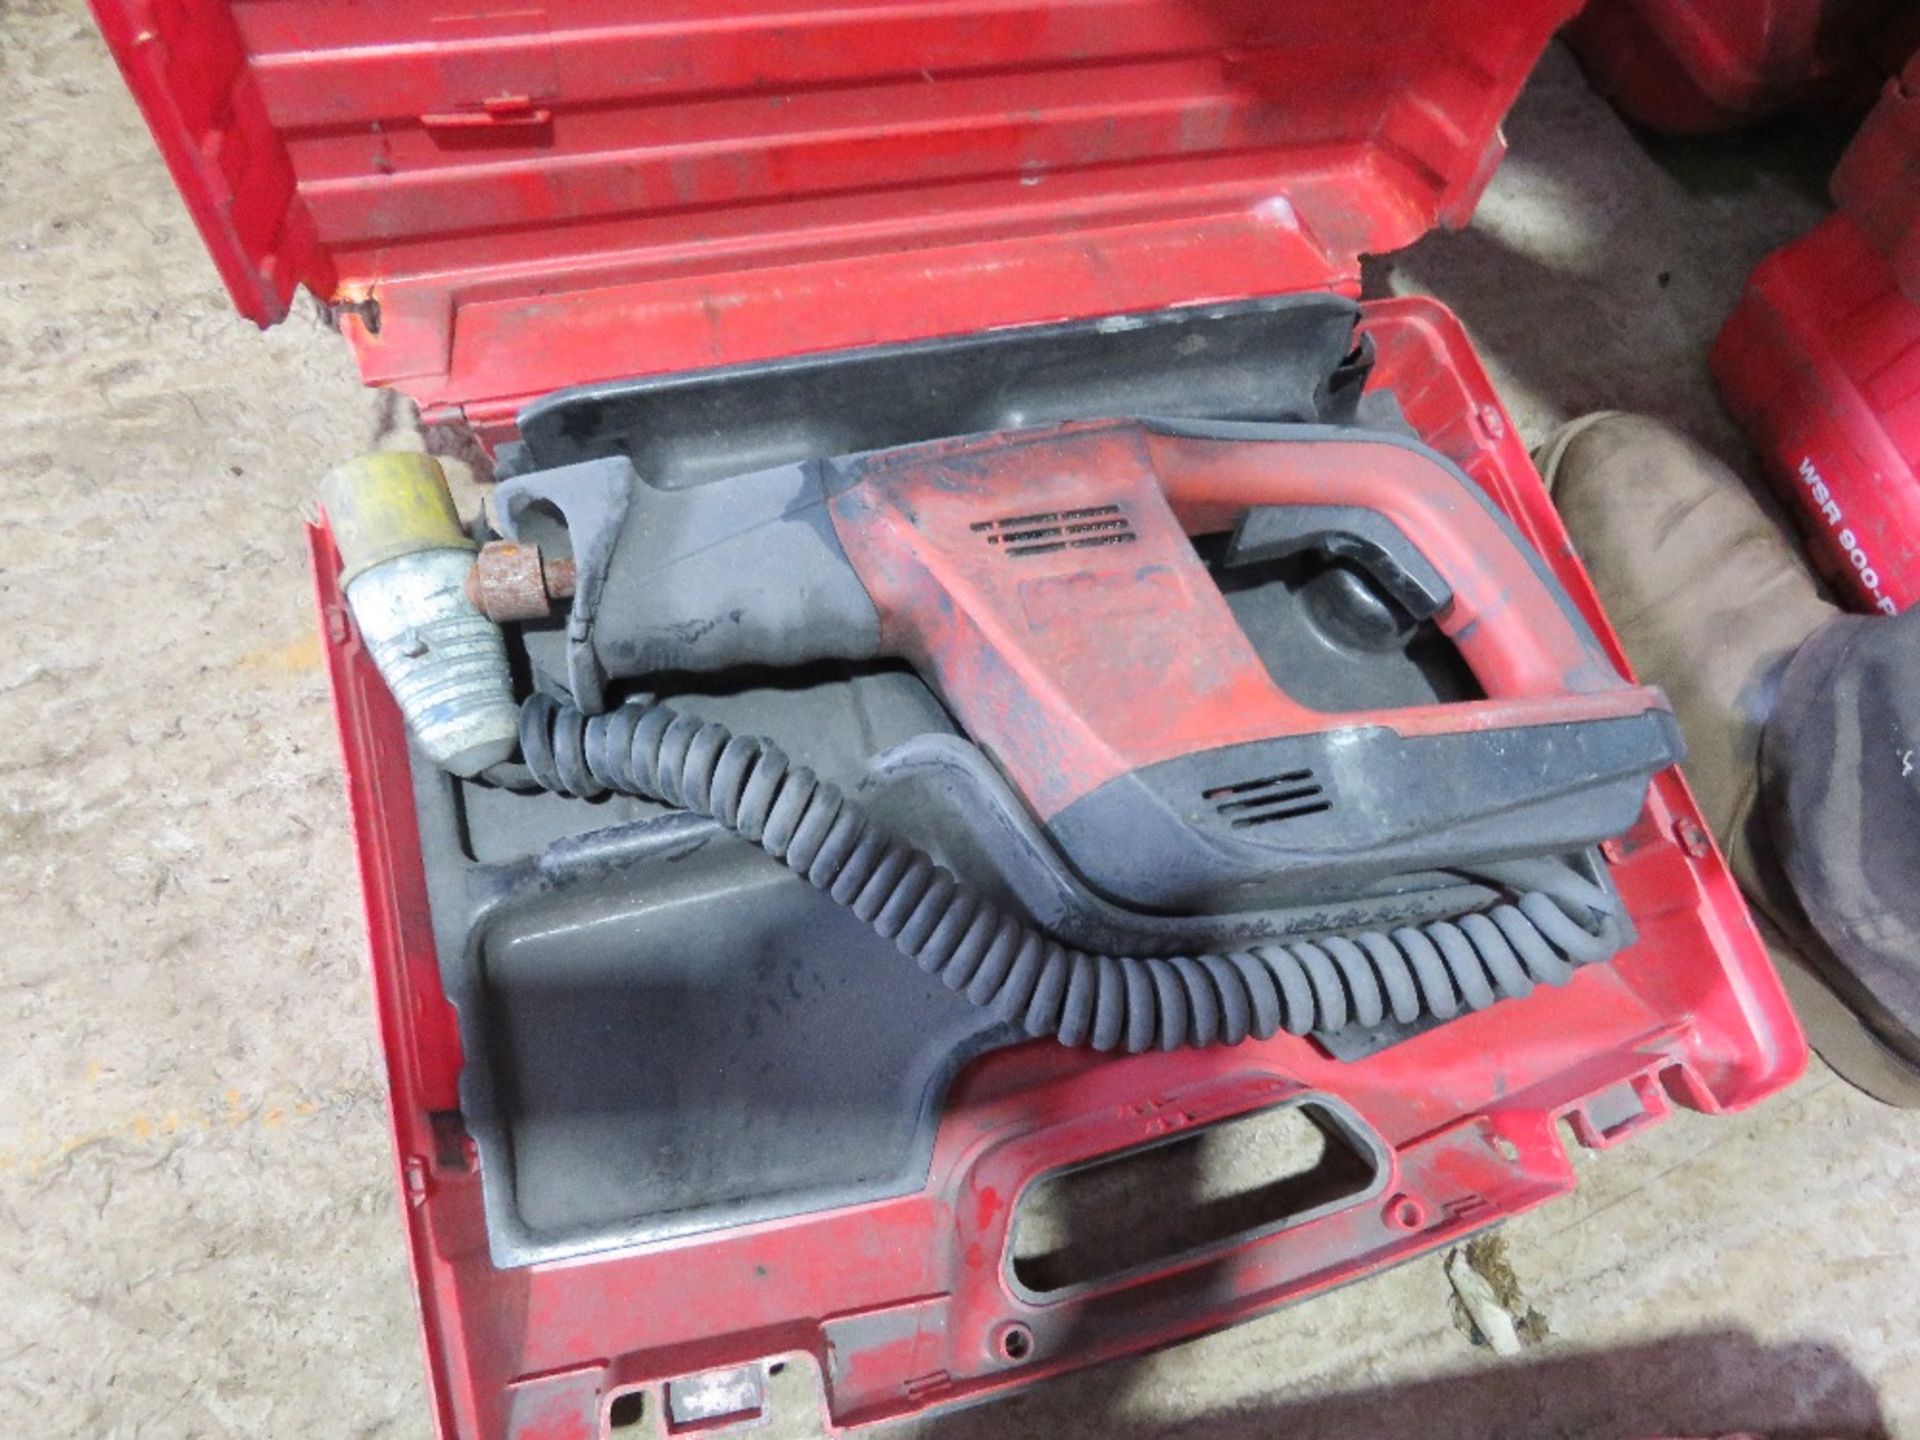 2 X HILTI 110VOLT POWERED RECIPROCATING SAWS. - Image 2 of 2